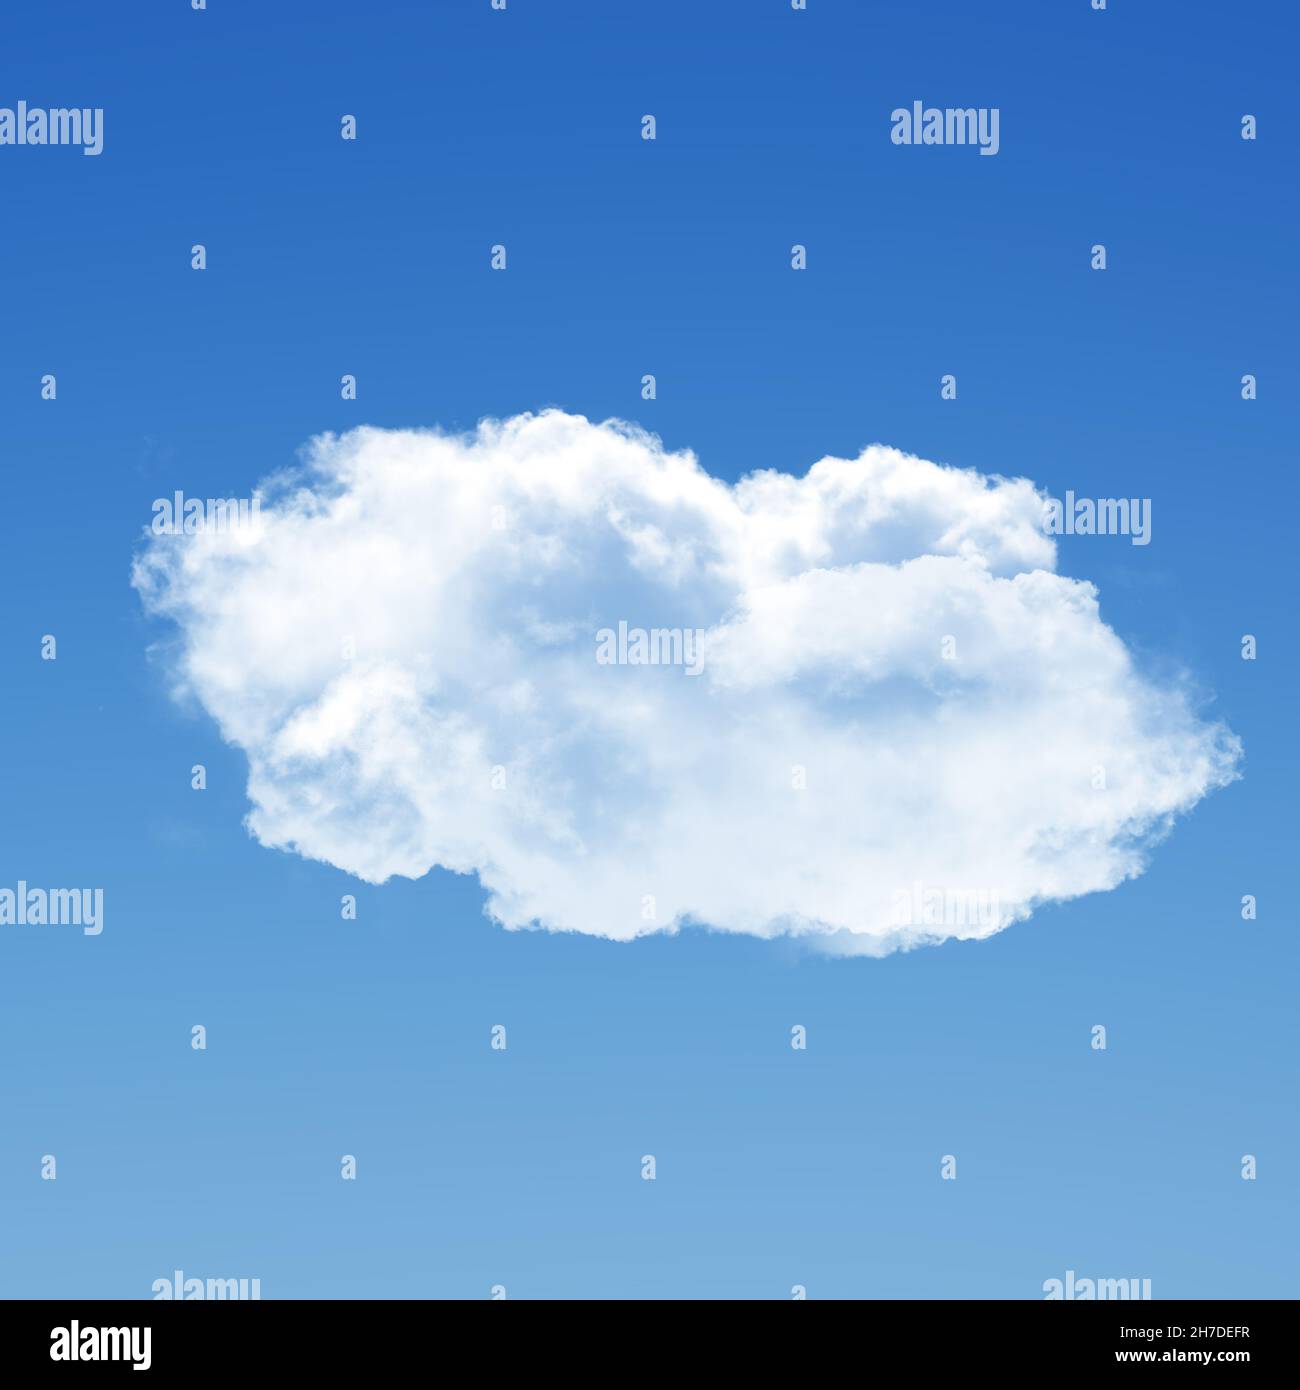 Cloud isolated over blue sky background 3D illustration, realistic cloud shape rendering Stock Photo